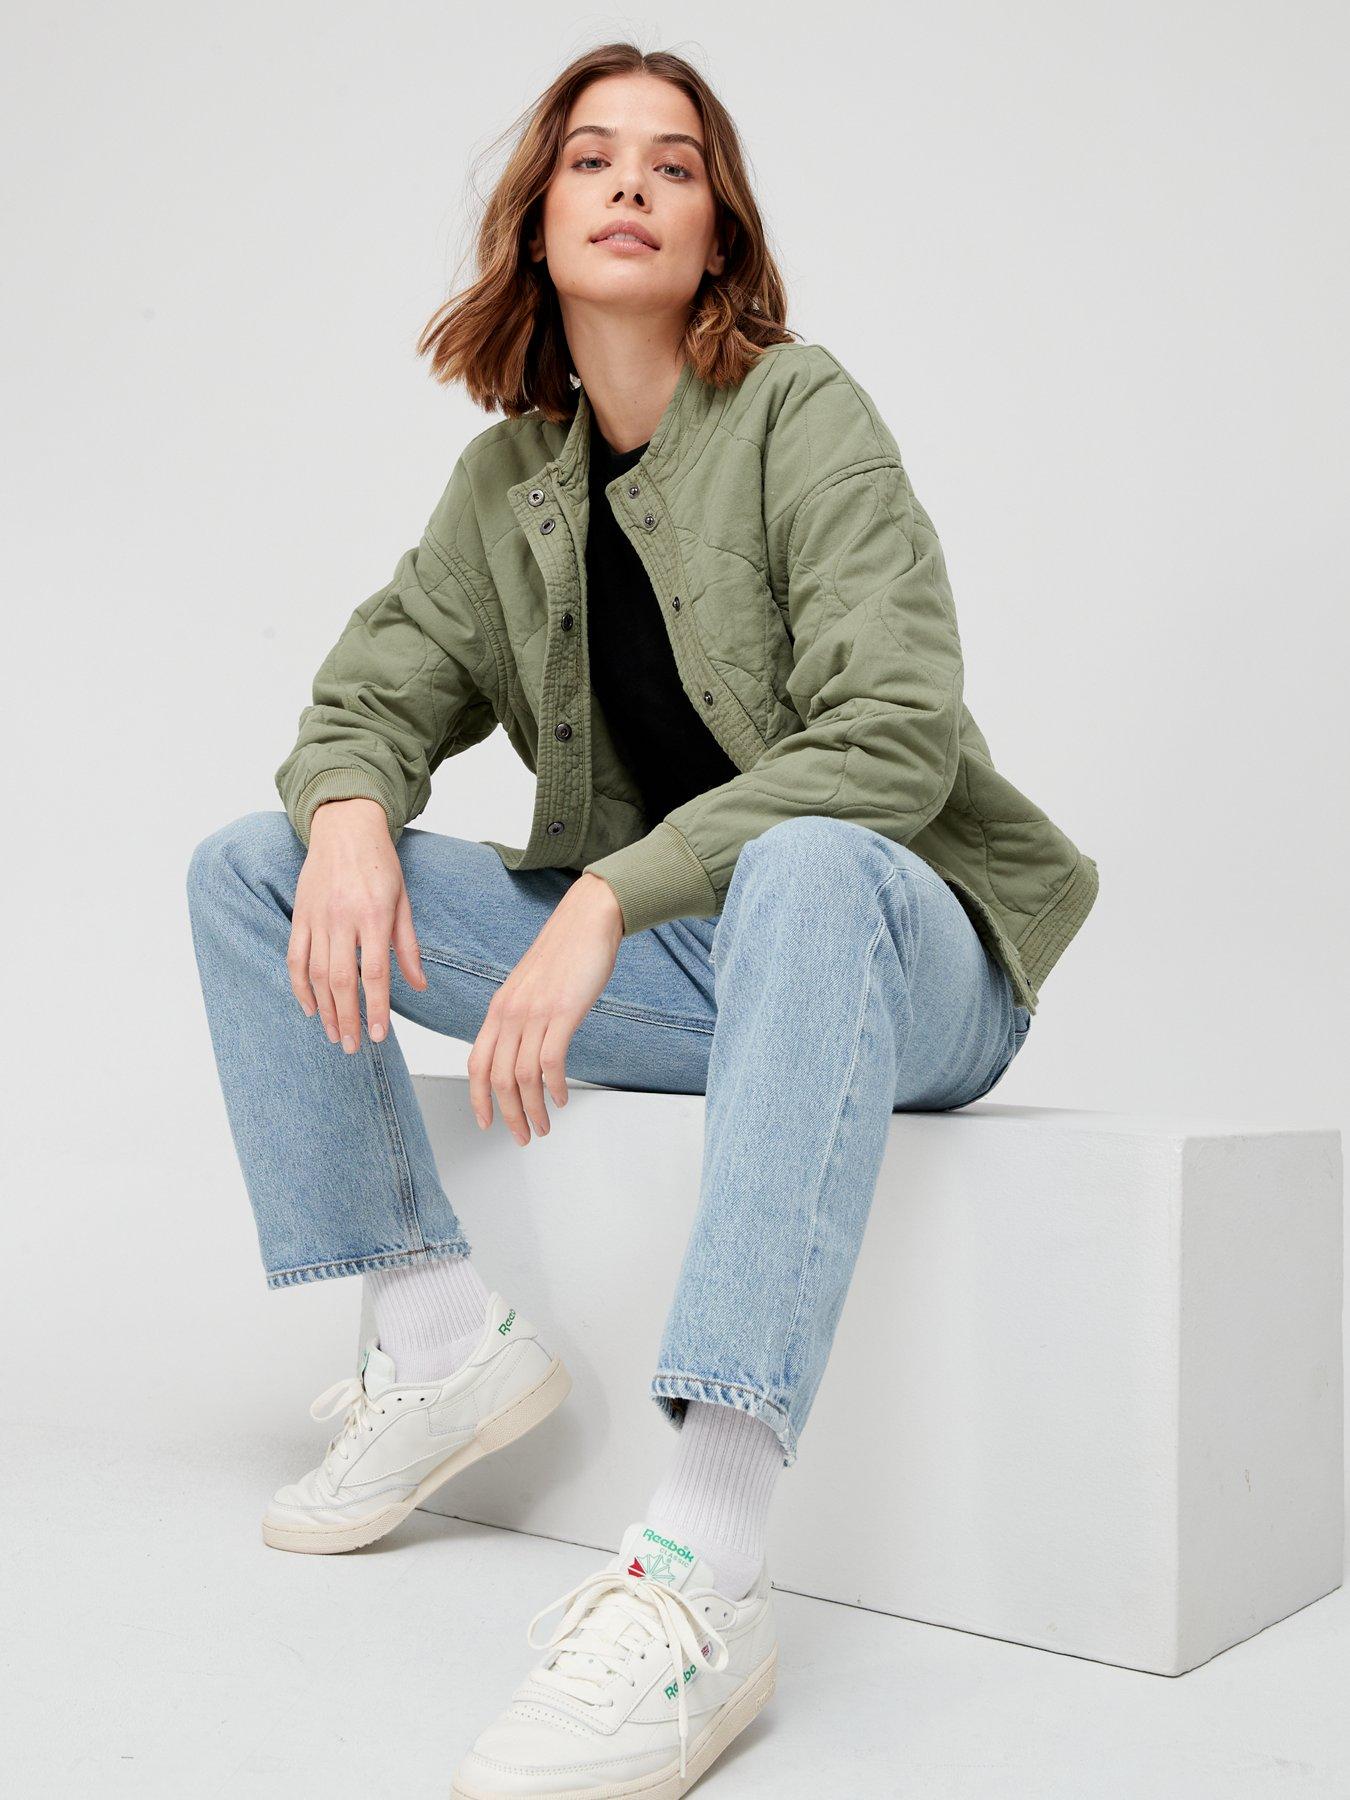 V by Very Washed Linen Look Jacket | very.co.uk